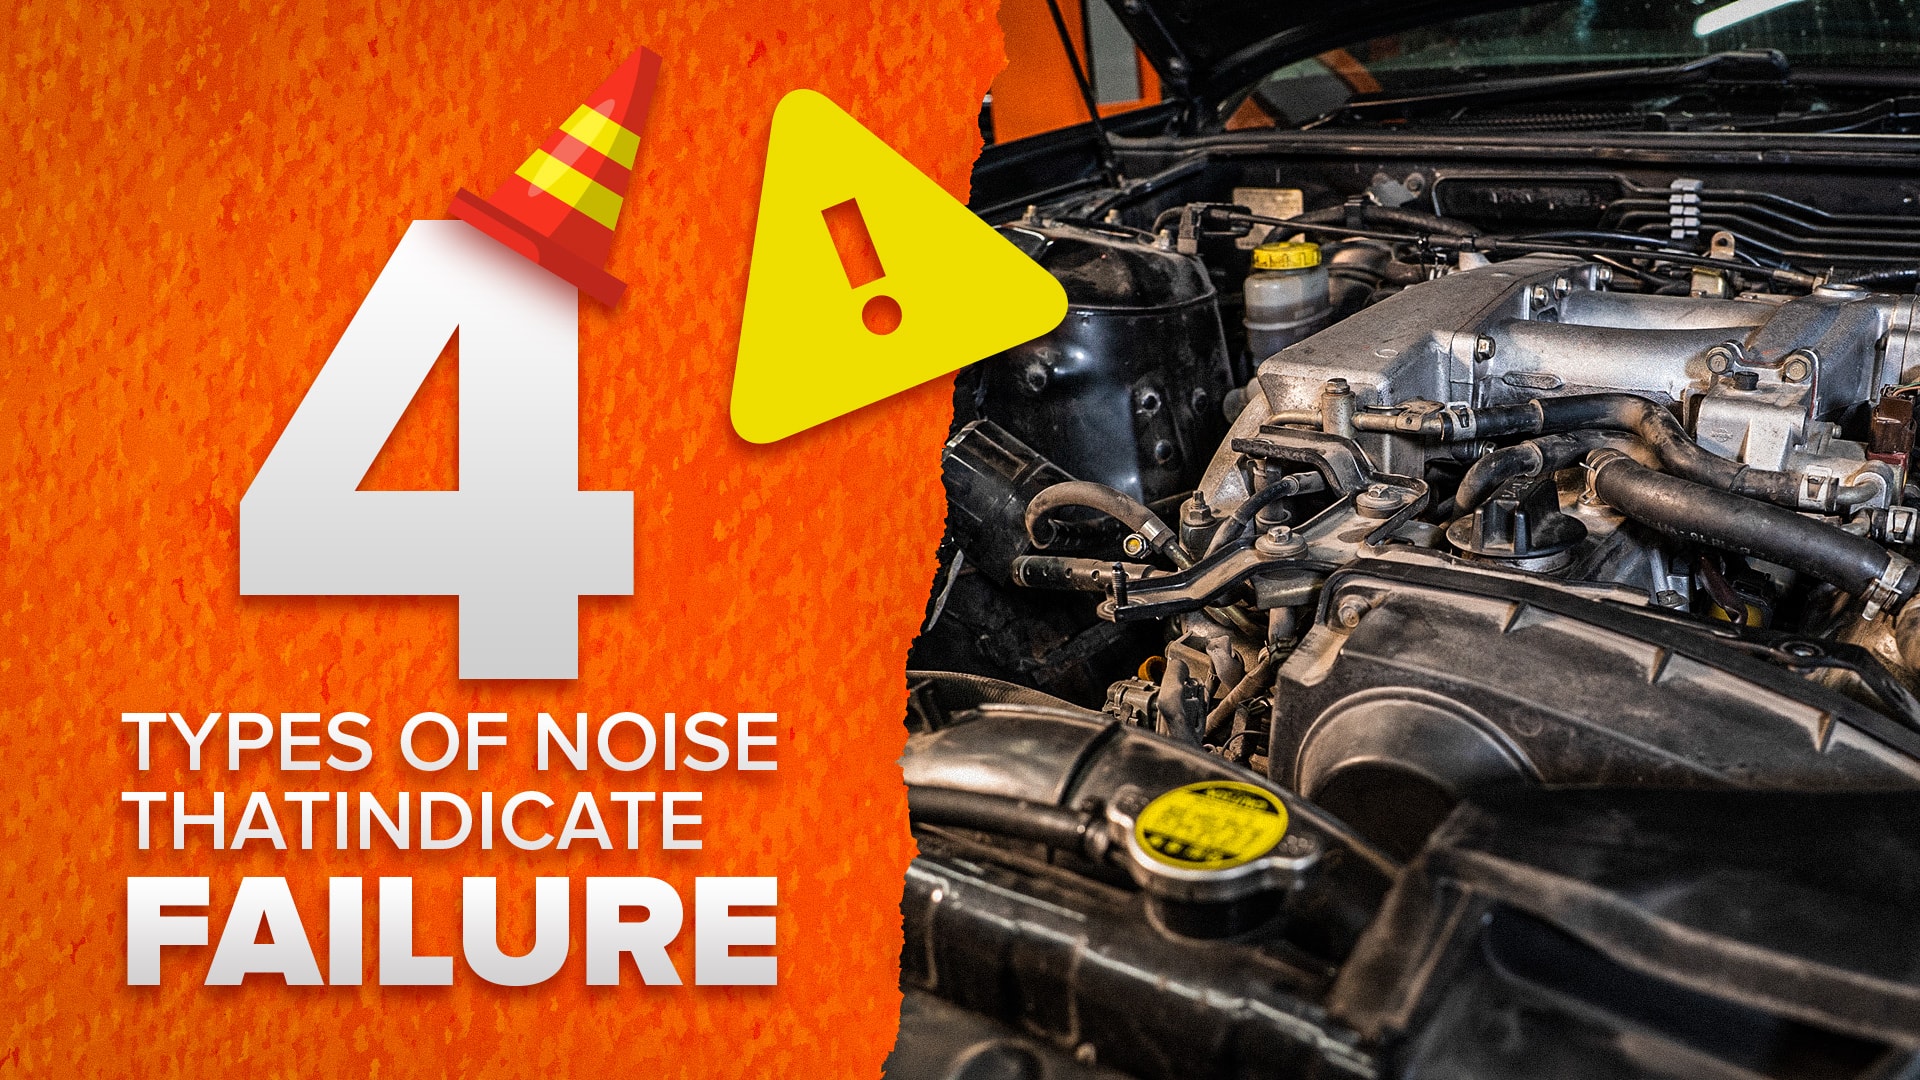 Noise from under the bonnet that shouldn’t be ignored